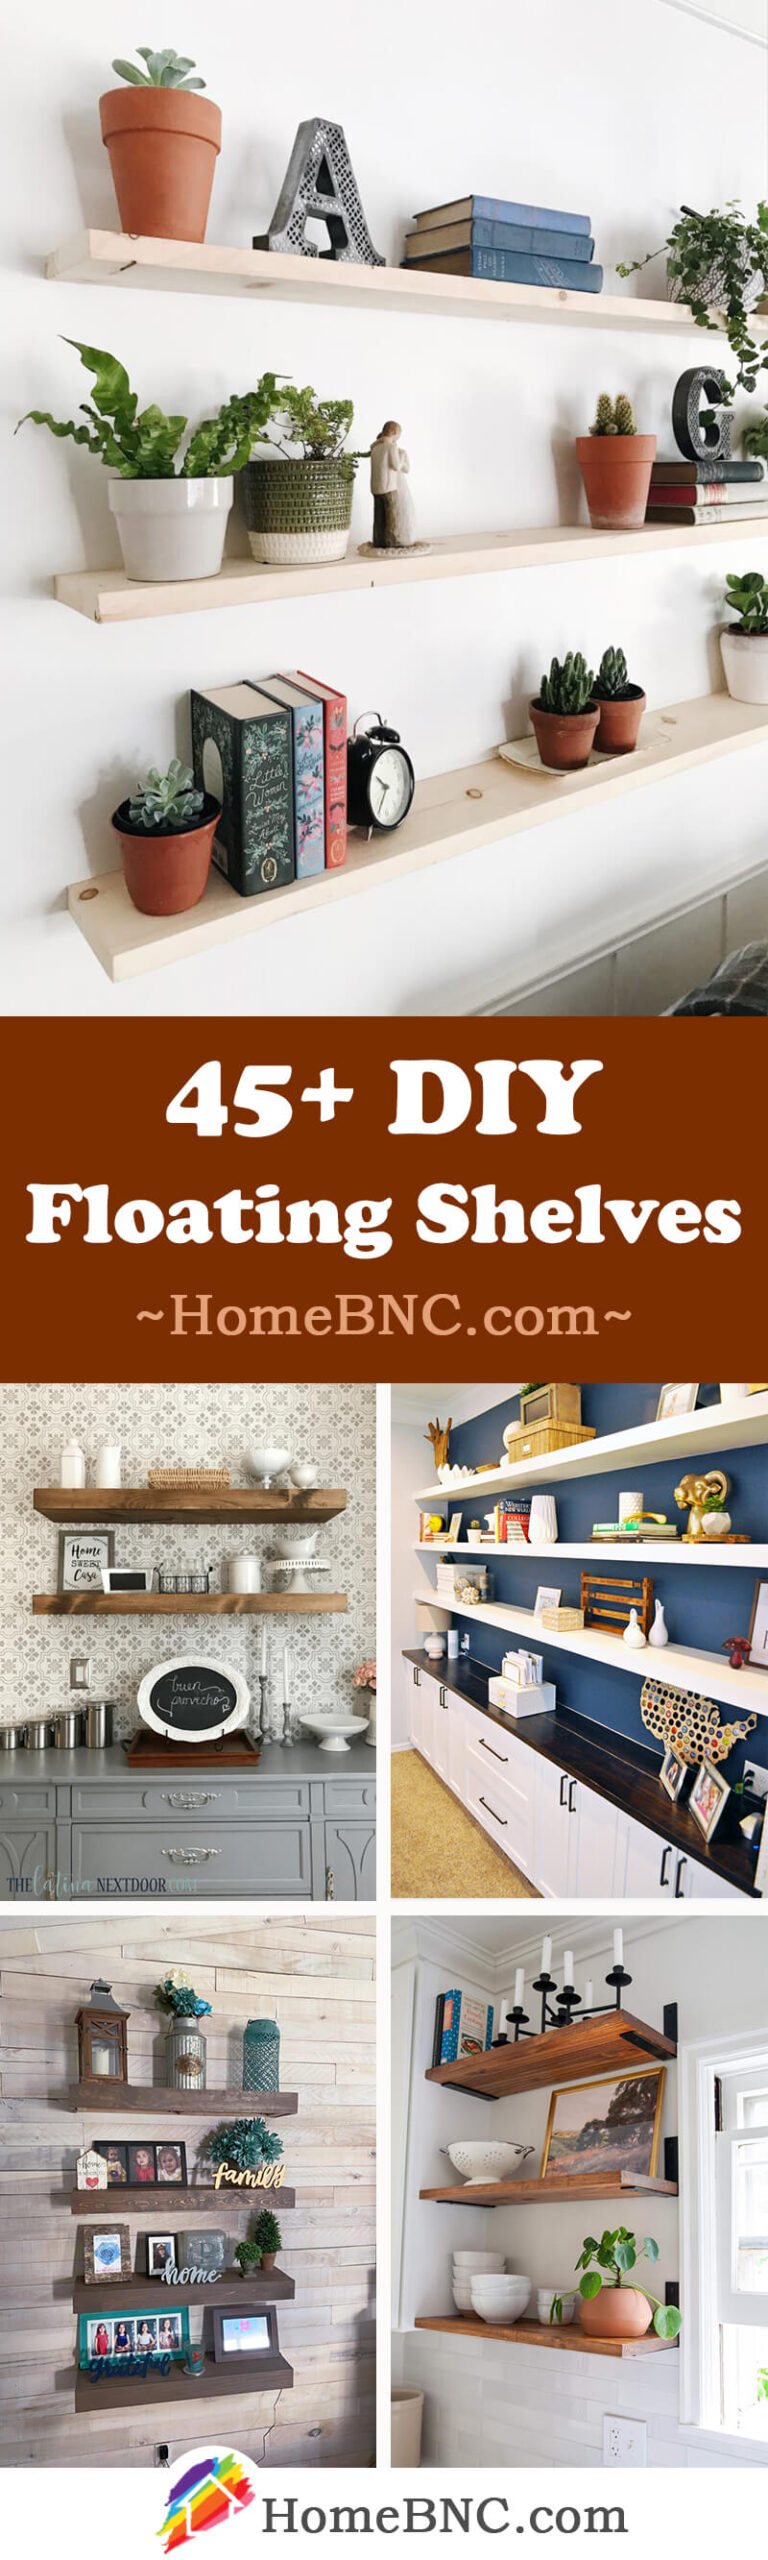 18+ Best DIY Floating Shelf Ideas and Designs for 18